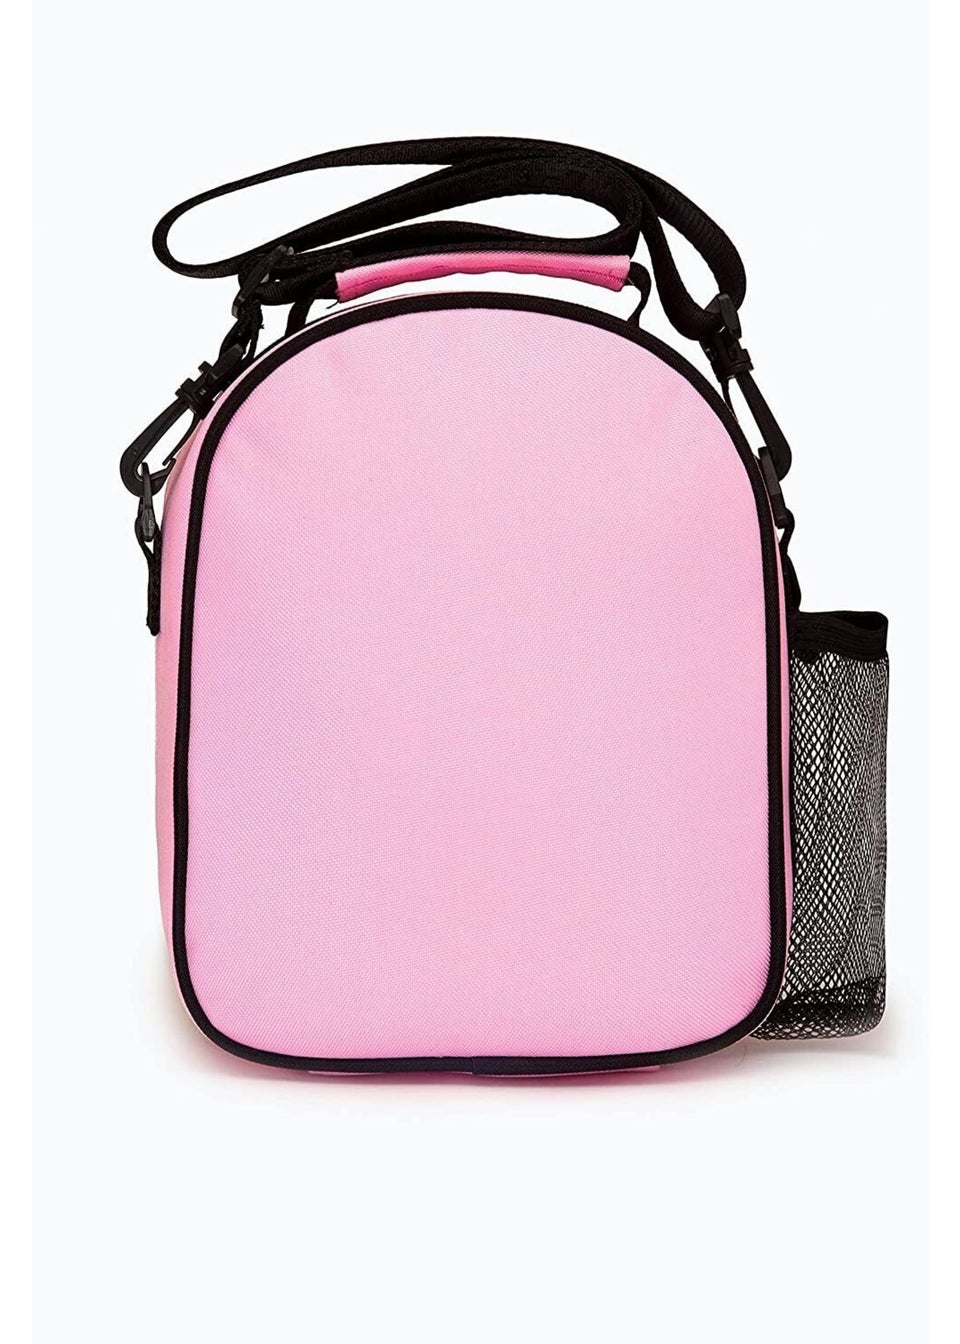 Hype Pink Maxi Lunch Bag